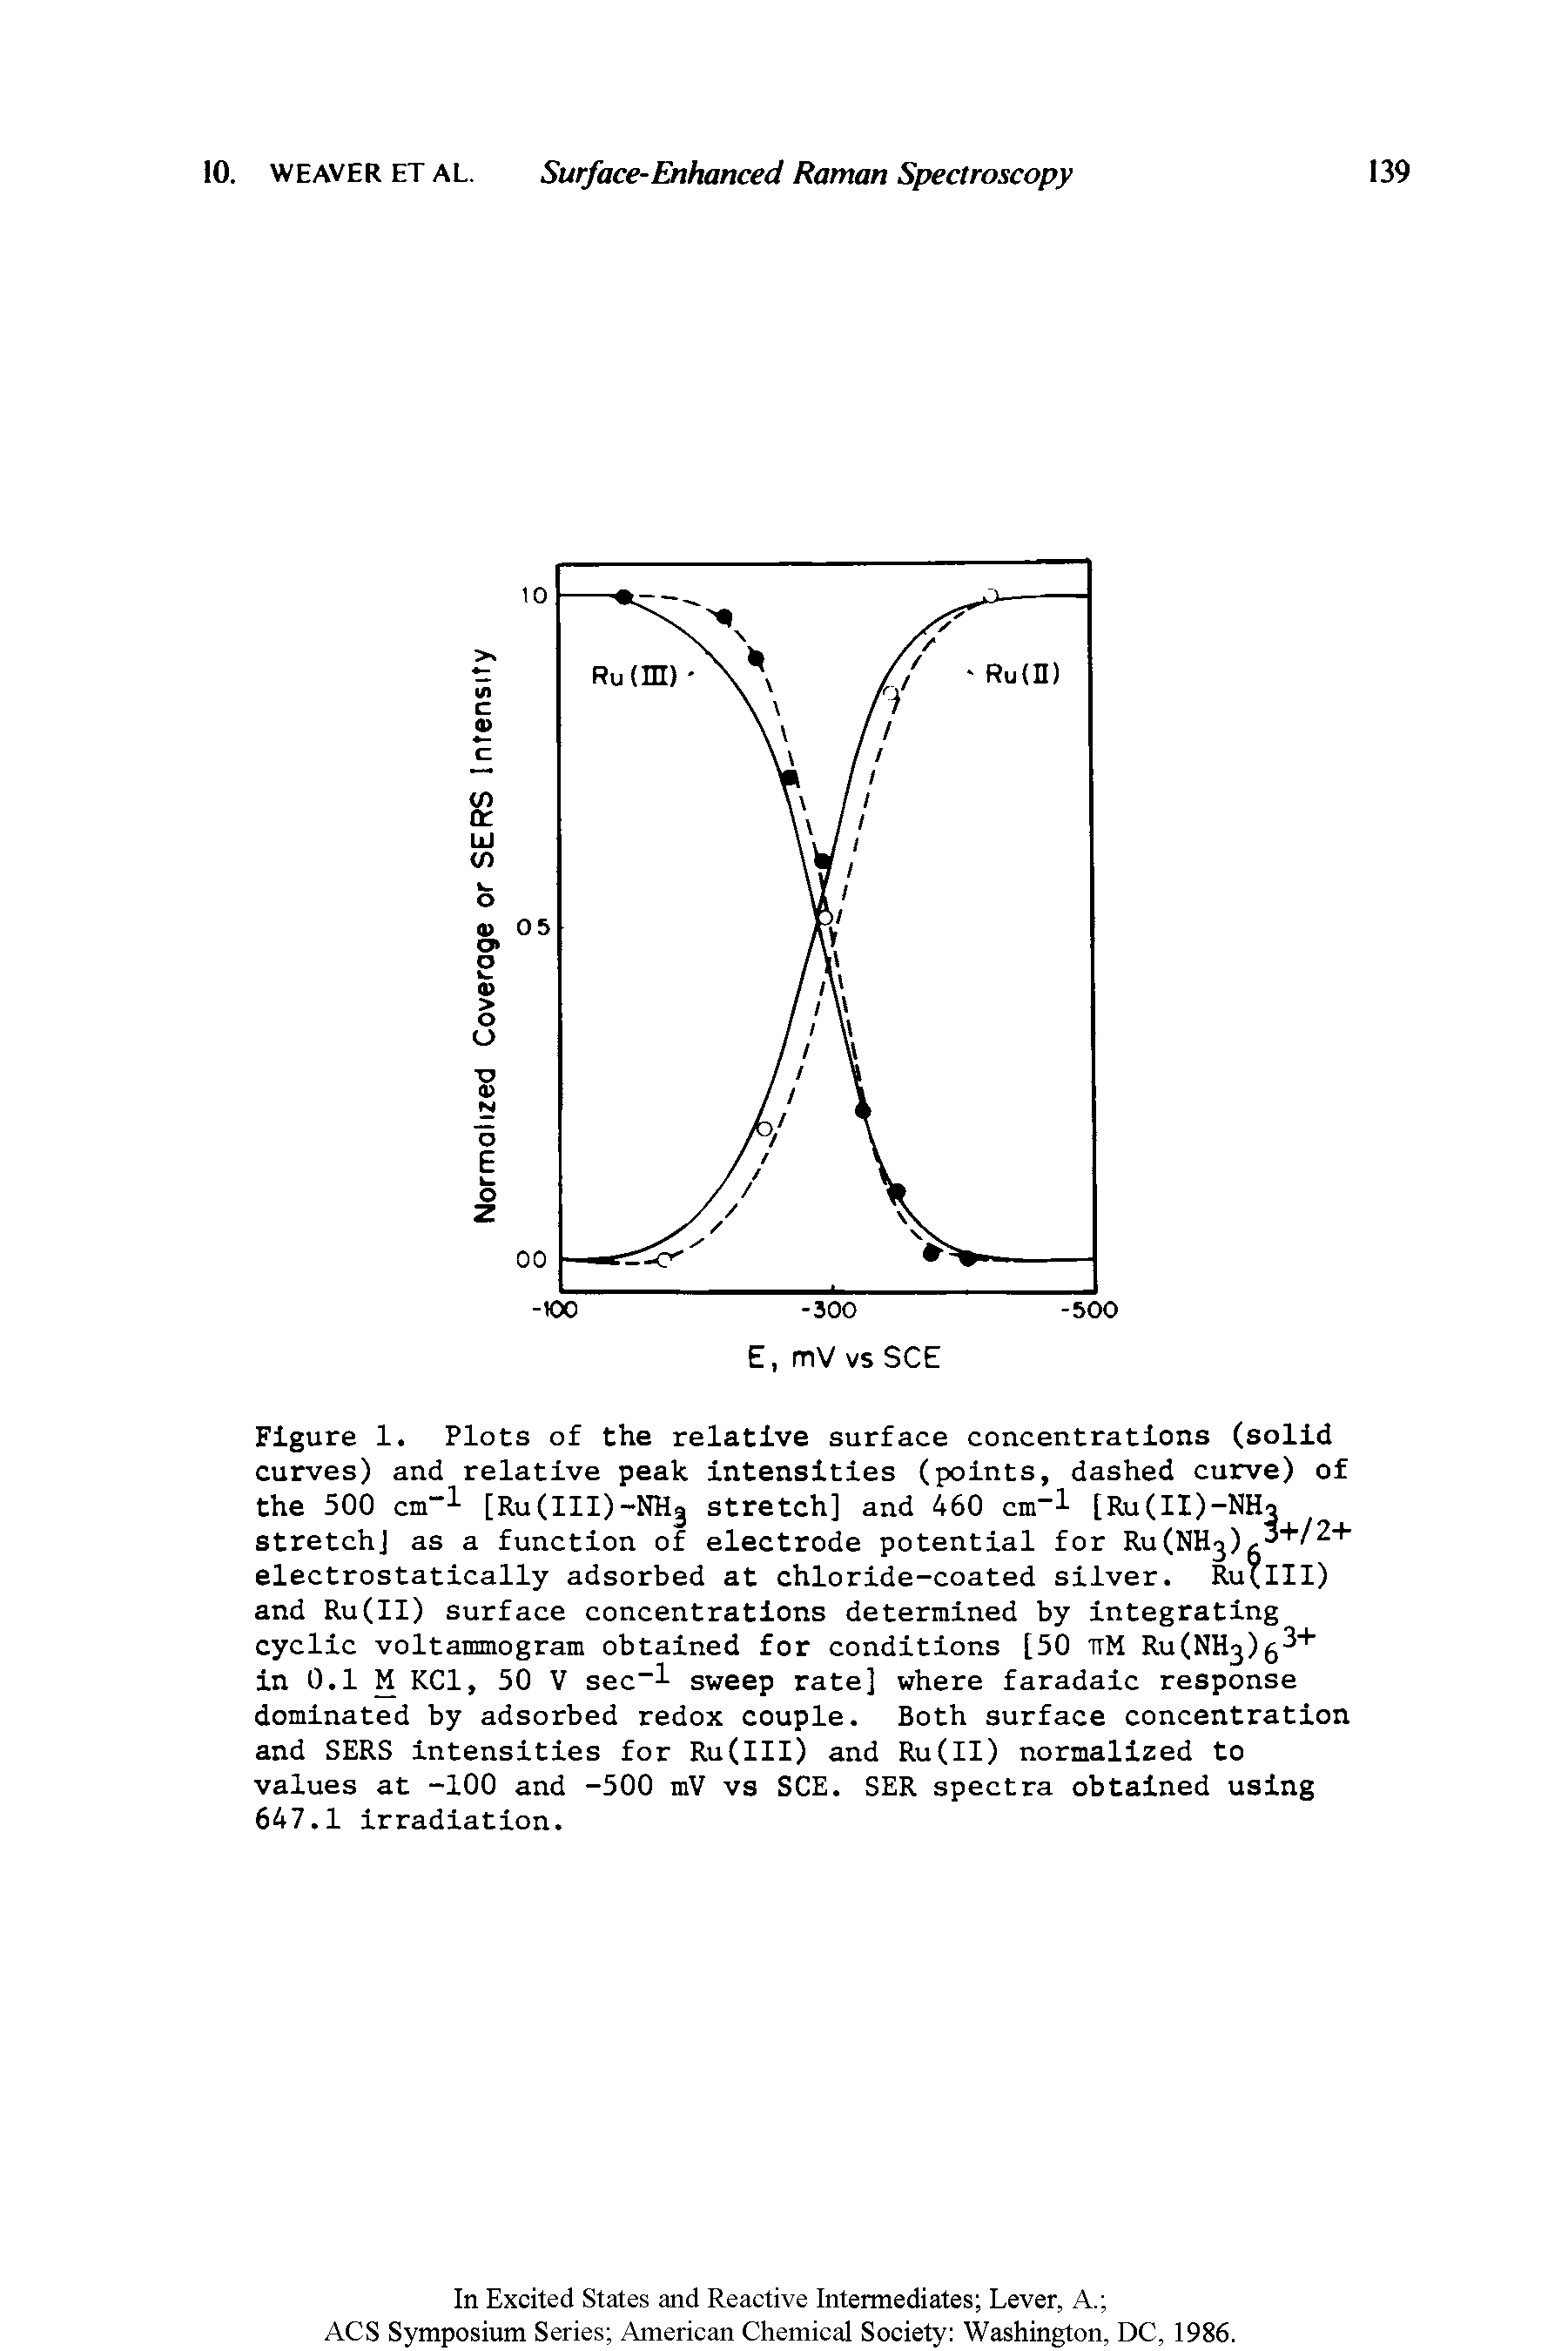 Figure 1. Plots of the relative surface concentrations (solid curves) and relative peak intensities (points, dashed curve) of the 500 cm-- - [Ru(III)-NHj stretch] and 460 cm l [Ru(II)-NH3 stretchJ as a function of electrode potential for Ru(NH3)g +/2+ electrostatically adsorbed at chloride-coated silver. Ru(III) and Ru(II) surface concentrations determined by integrating cyclic voltammogram obtained for conditions [50 ttM Ru(NH3)g3+ in 0.1 M KC1, 50 V sec l sweep rate] where faradaic response dominated by adsorbed redox couple. Both surface concentration and SERS intensities for Ru(III) and Ru(II) normalized to values at -100 and -500 mV vs SCE. SER spectra obtained using 647.1 irradiation.